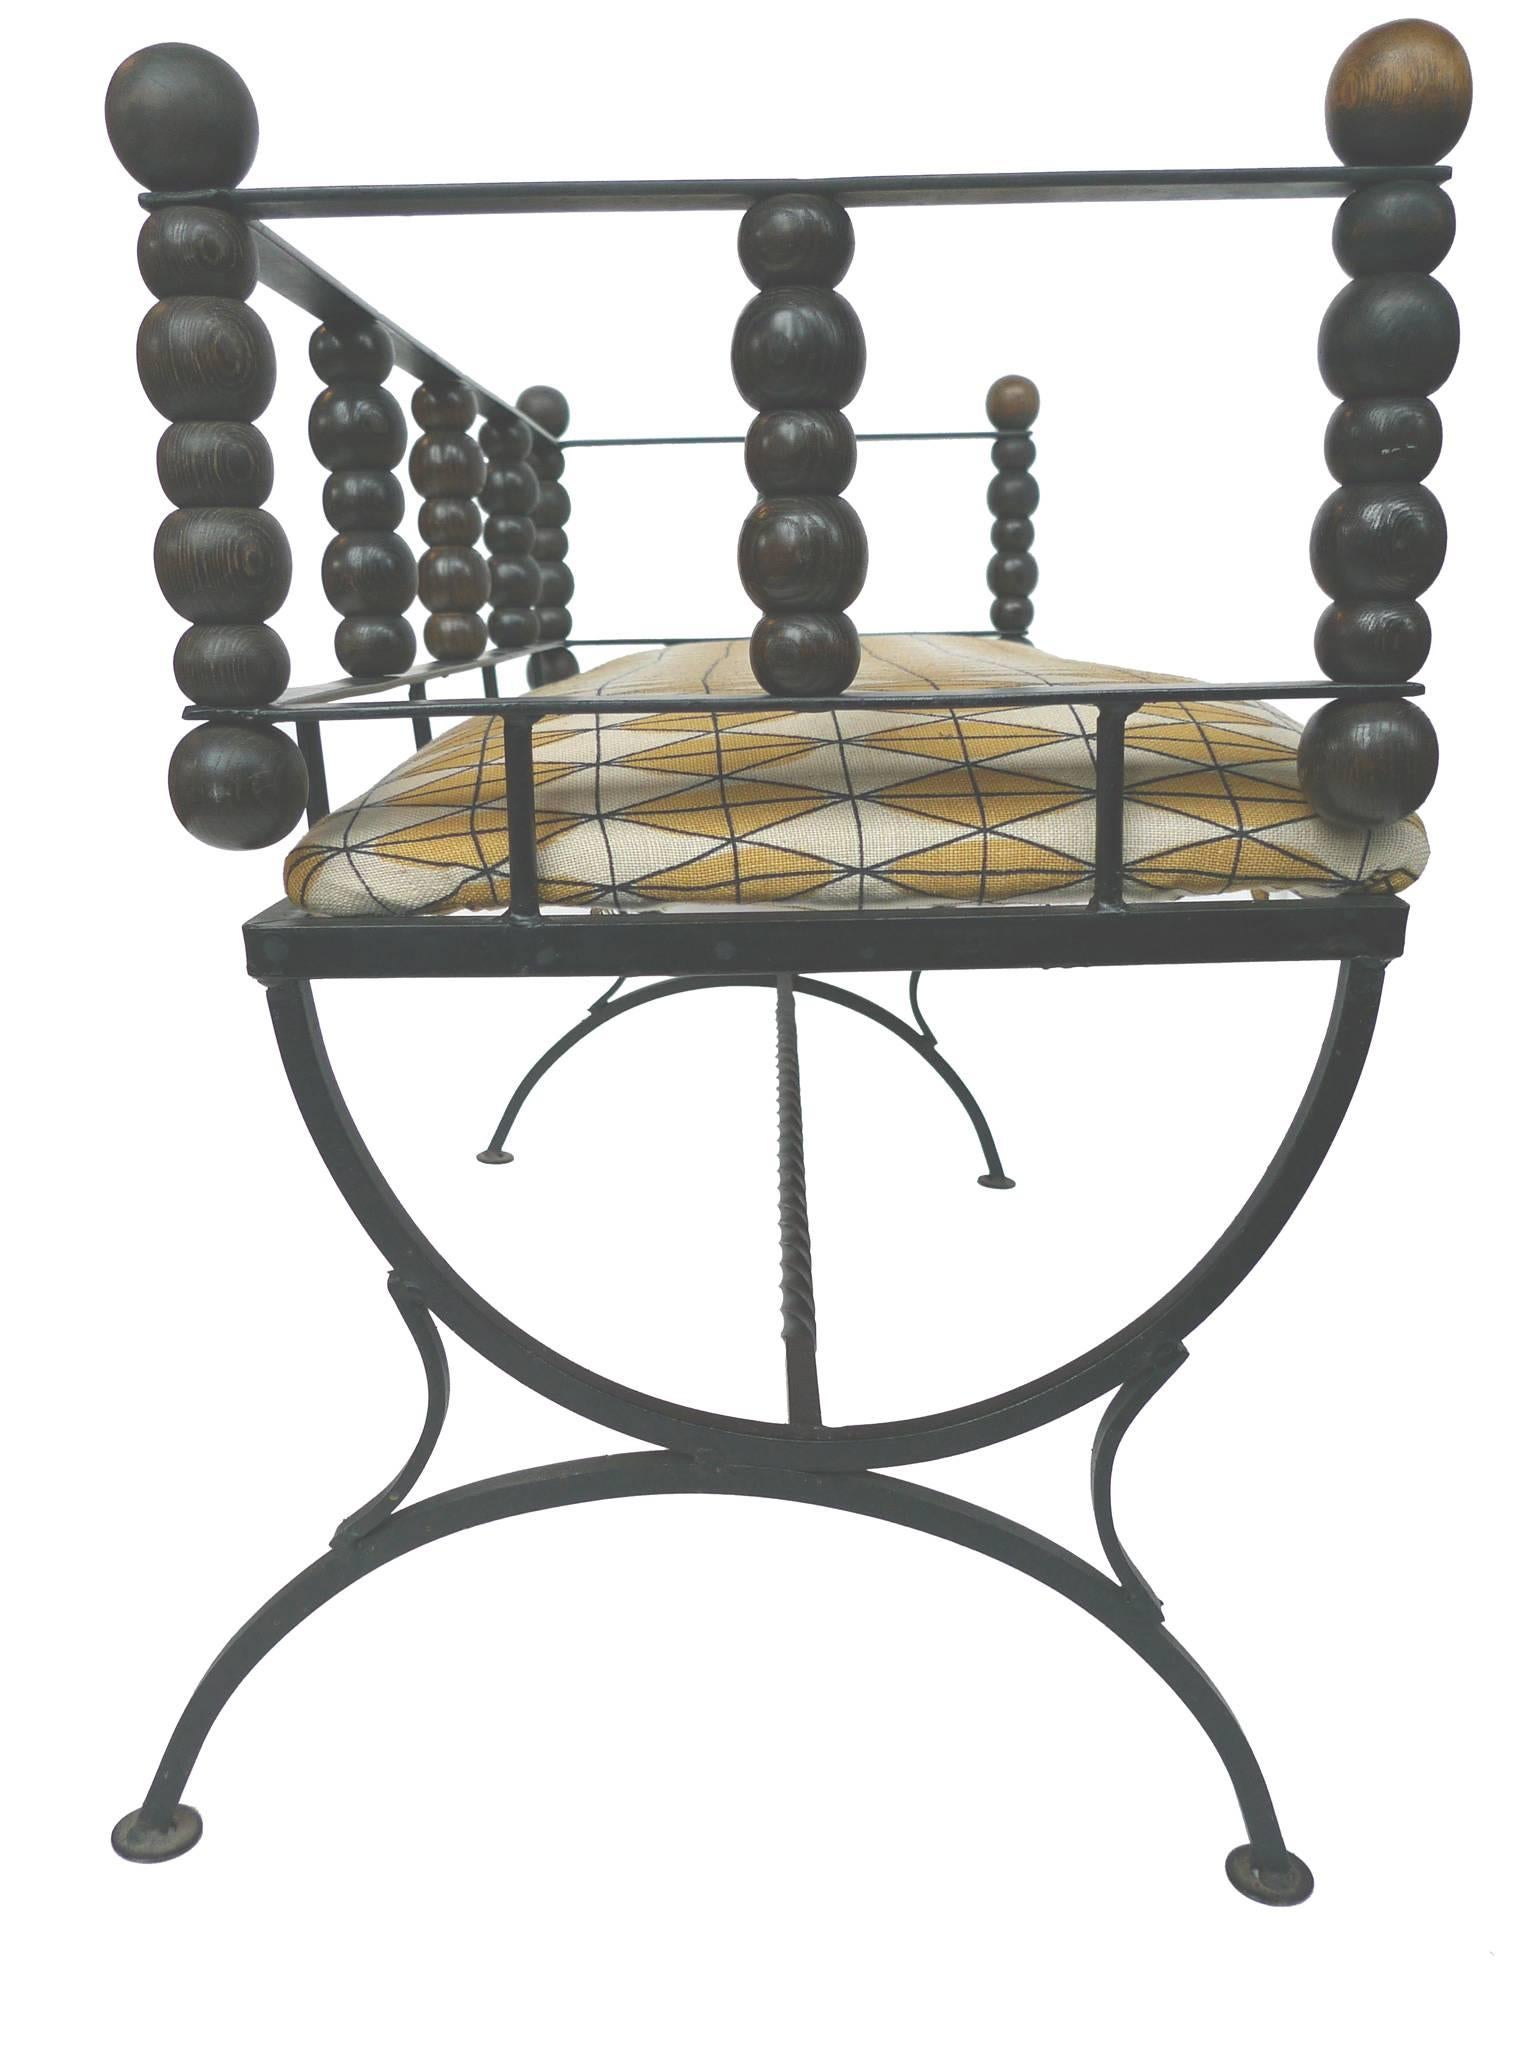 Spanish Colonial 1960s Wrought Iron Bench